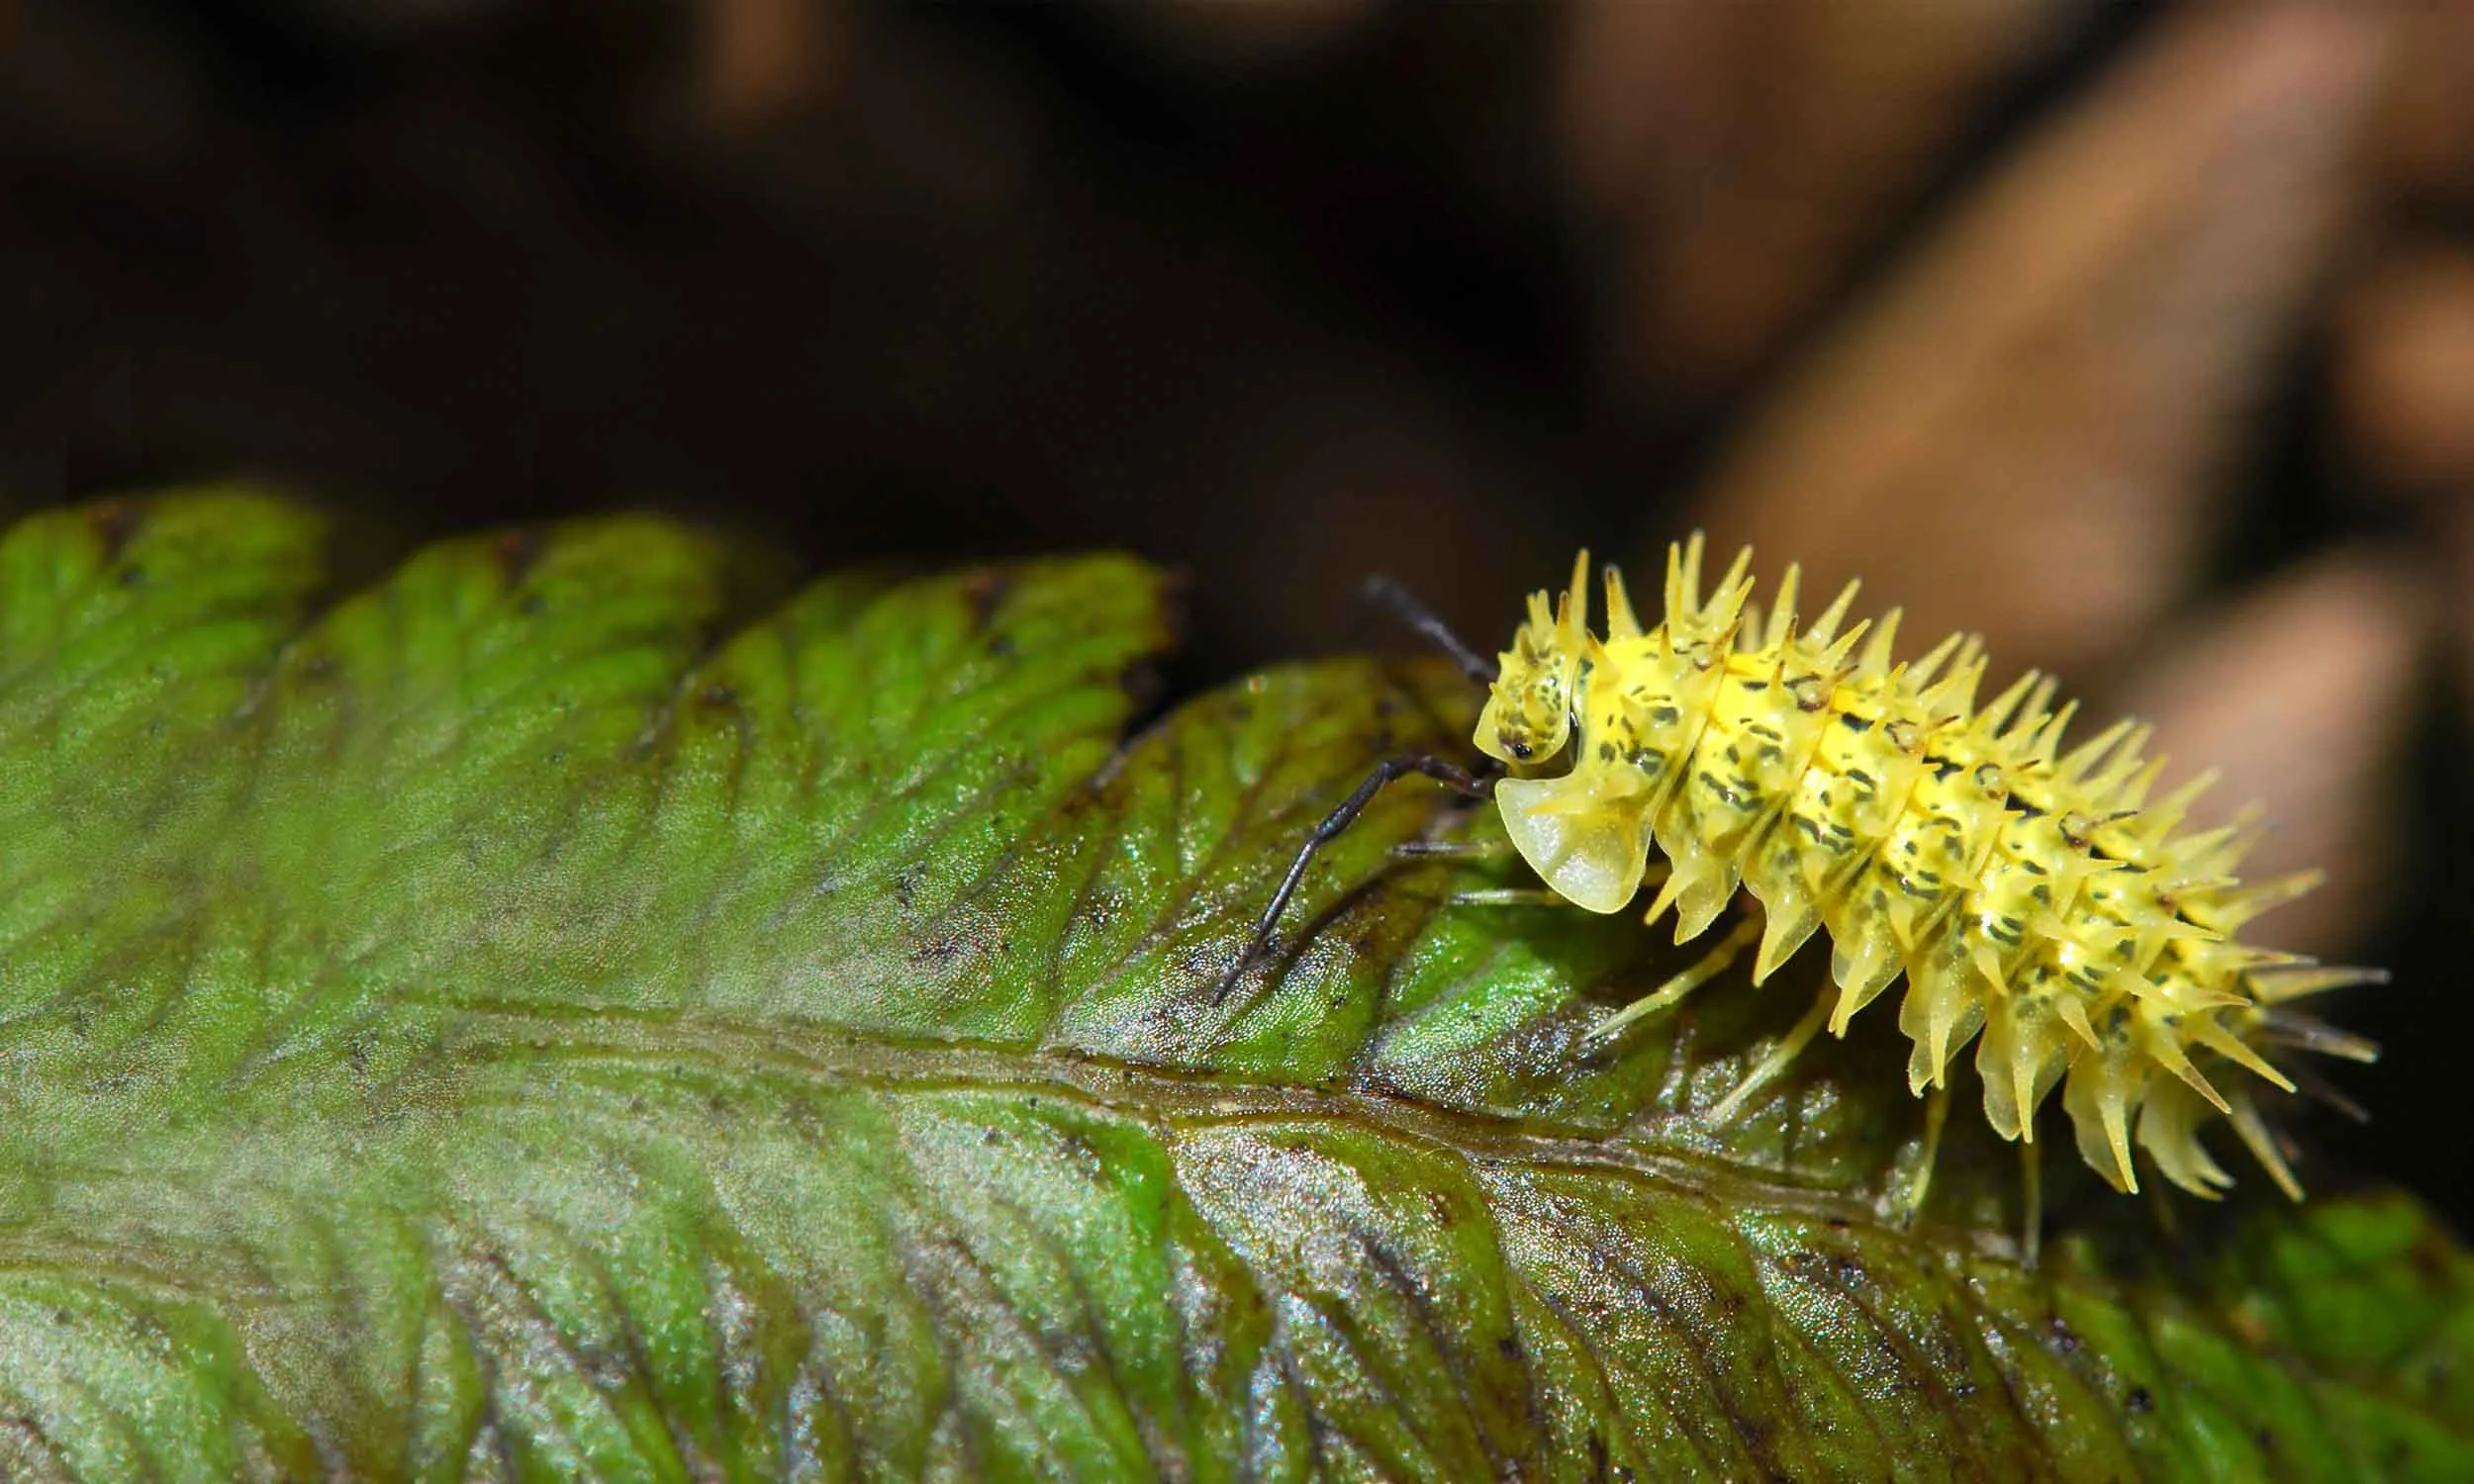 A Spiky Yellow Woodlouse crawling over a green leaf.